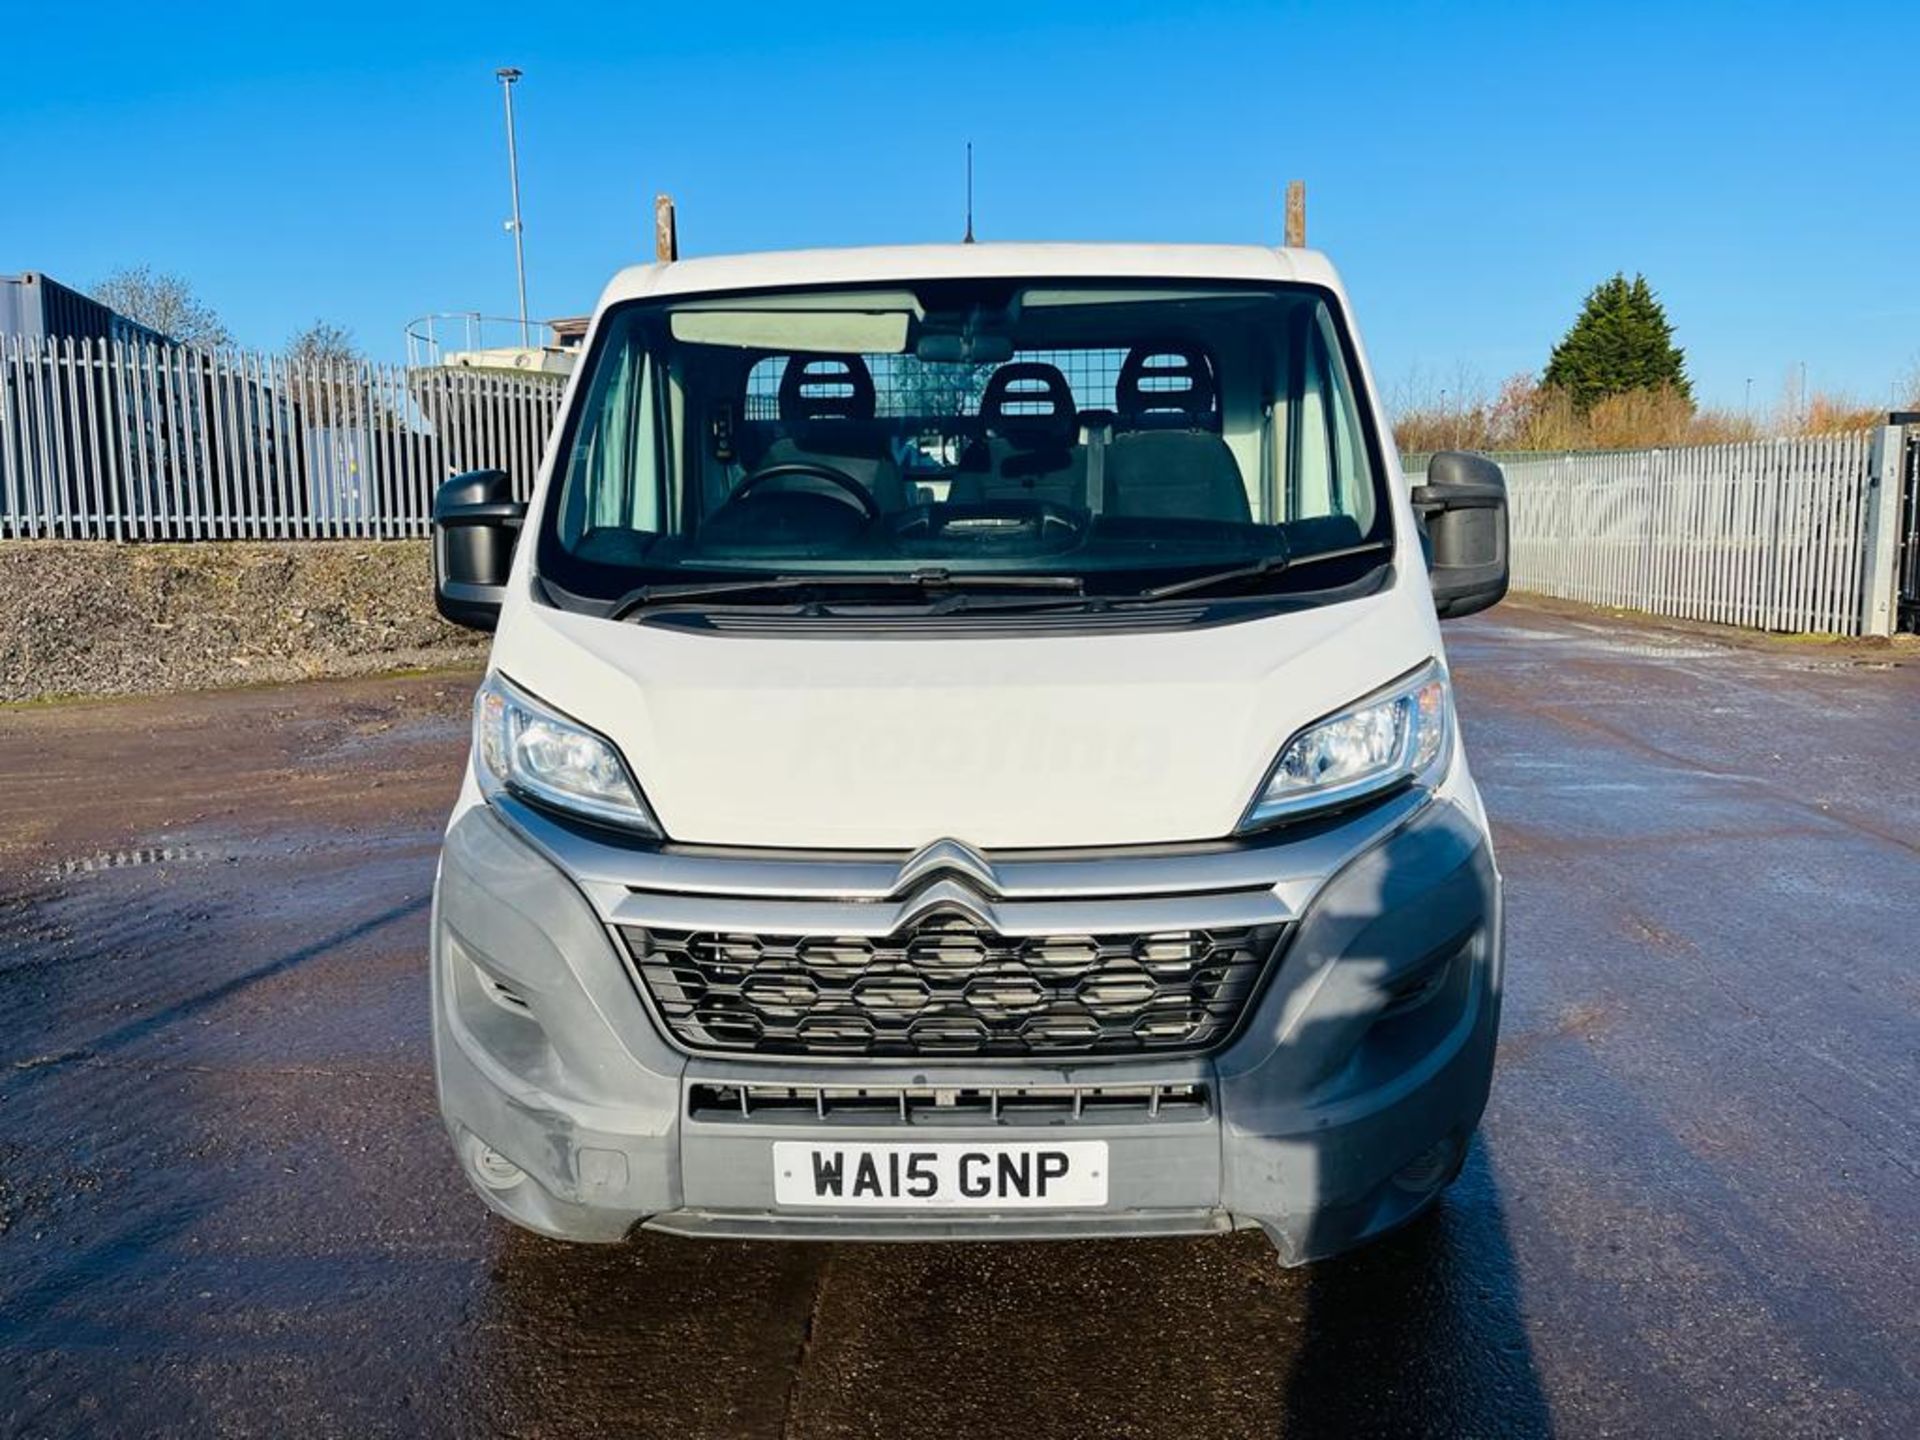 ** ON SALE ** Citroen Relay 35 2.2 HDI 130 LWB Alloy Tipper 2015 '15 Reg' Only 105,090 Miles - Image 3 of 31